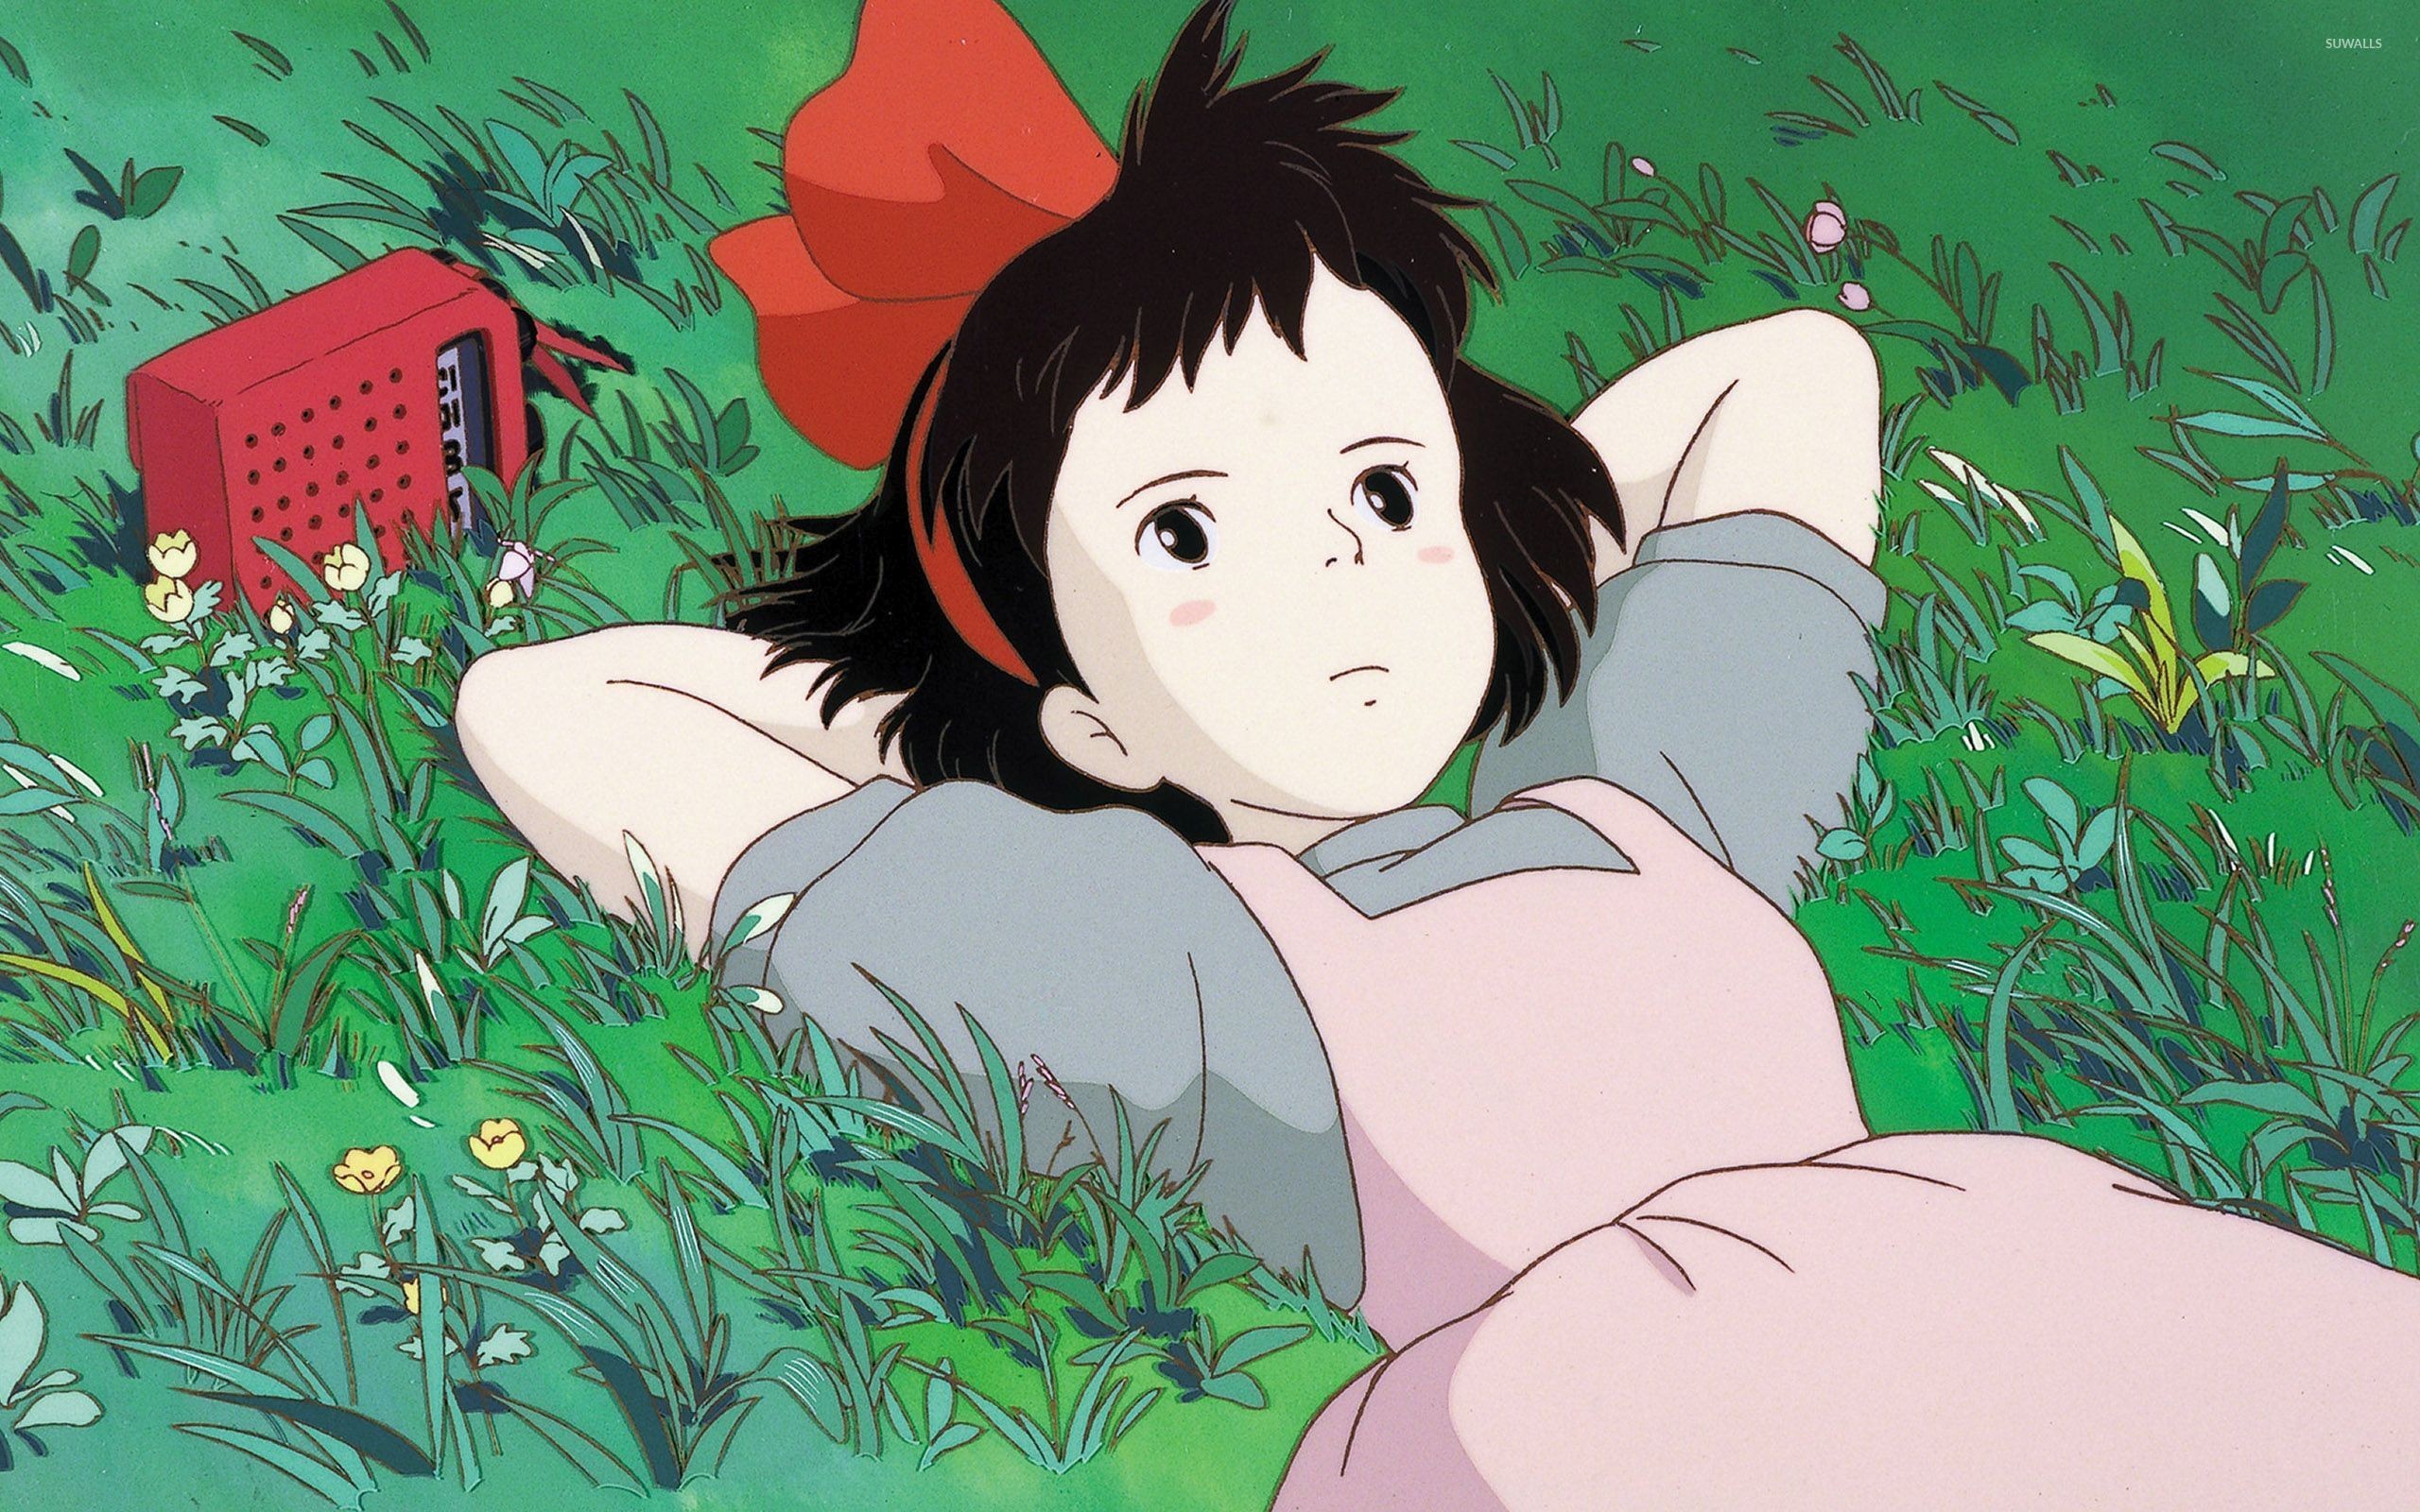 Kikis Delivery Service Wallpaper Iphone.